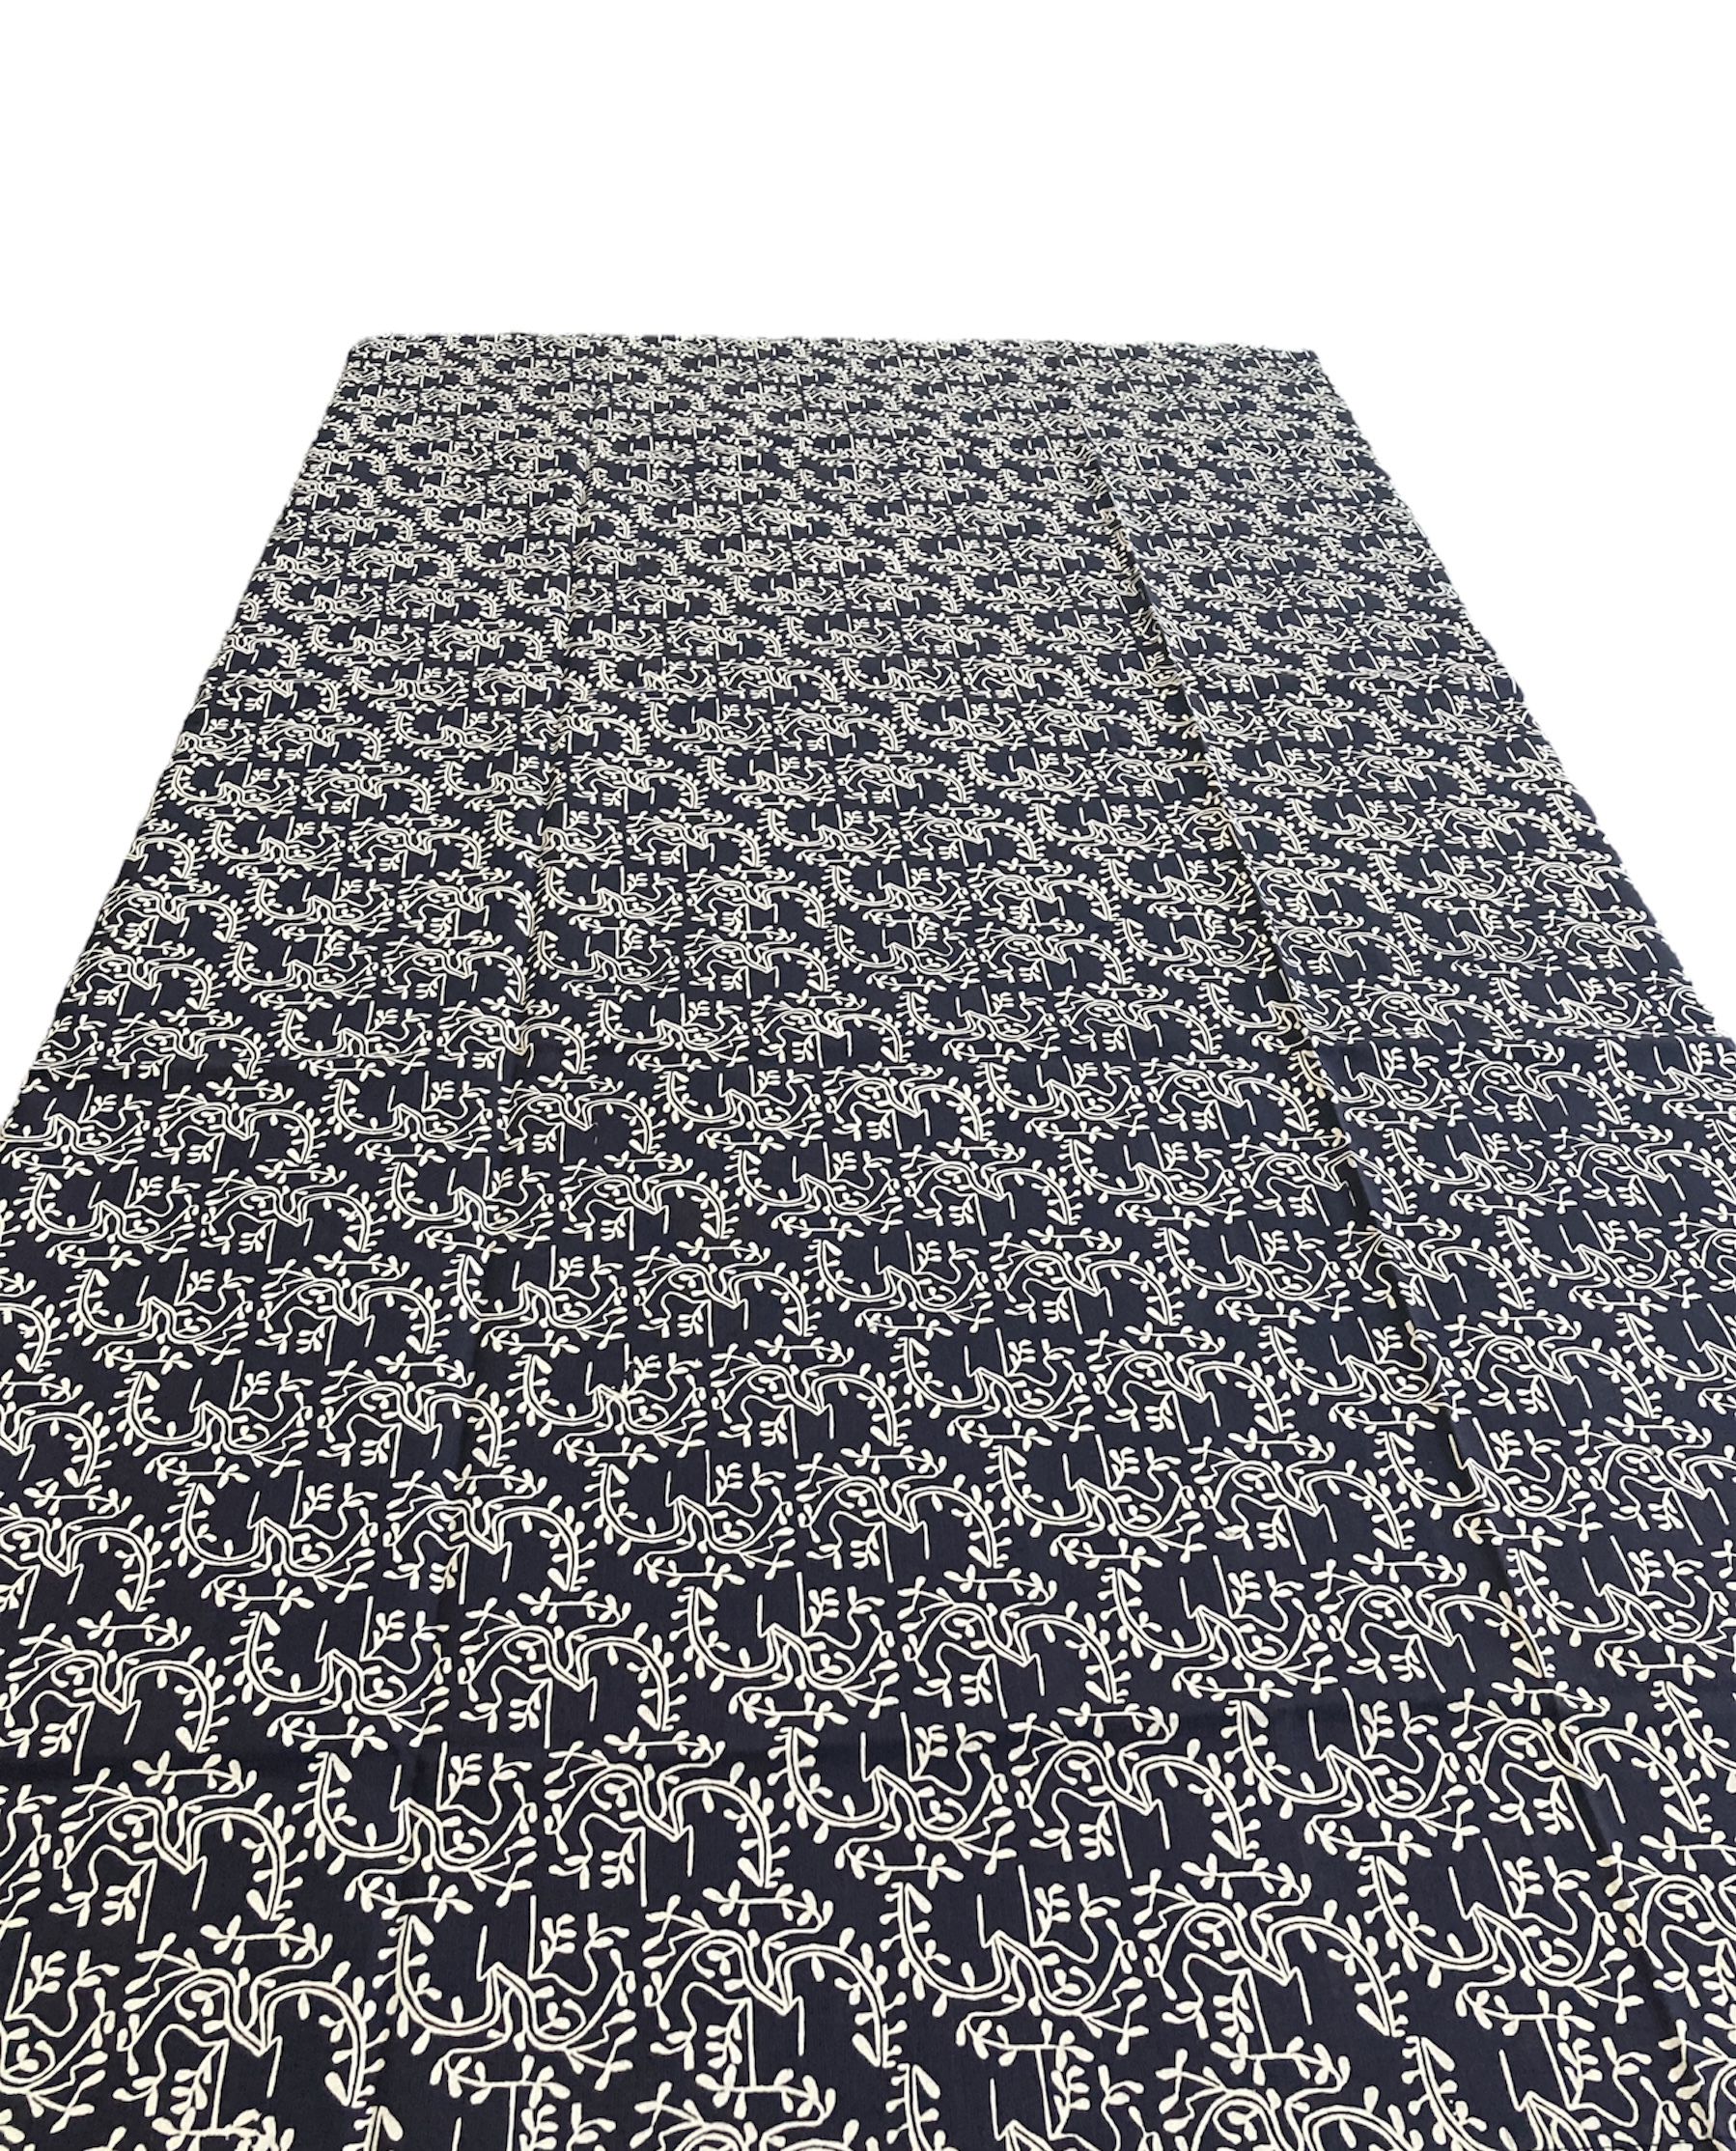 100% cotton Tablecloth approx. 59" x 57" from Namibia - # bw12t